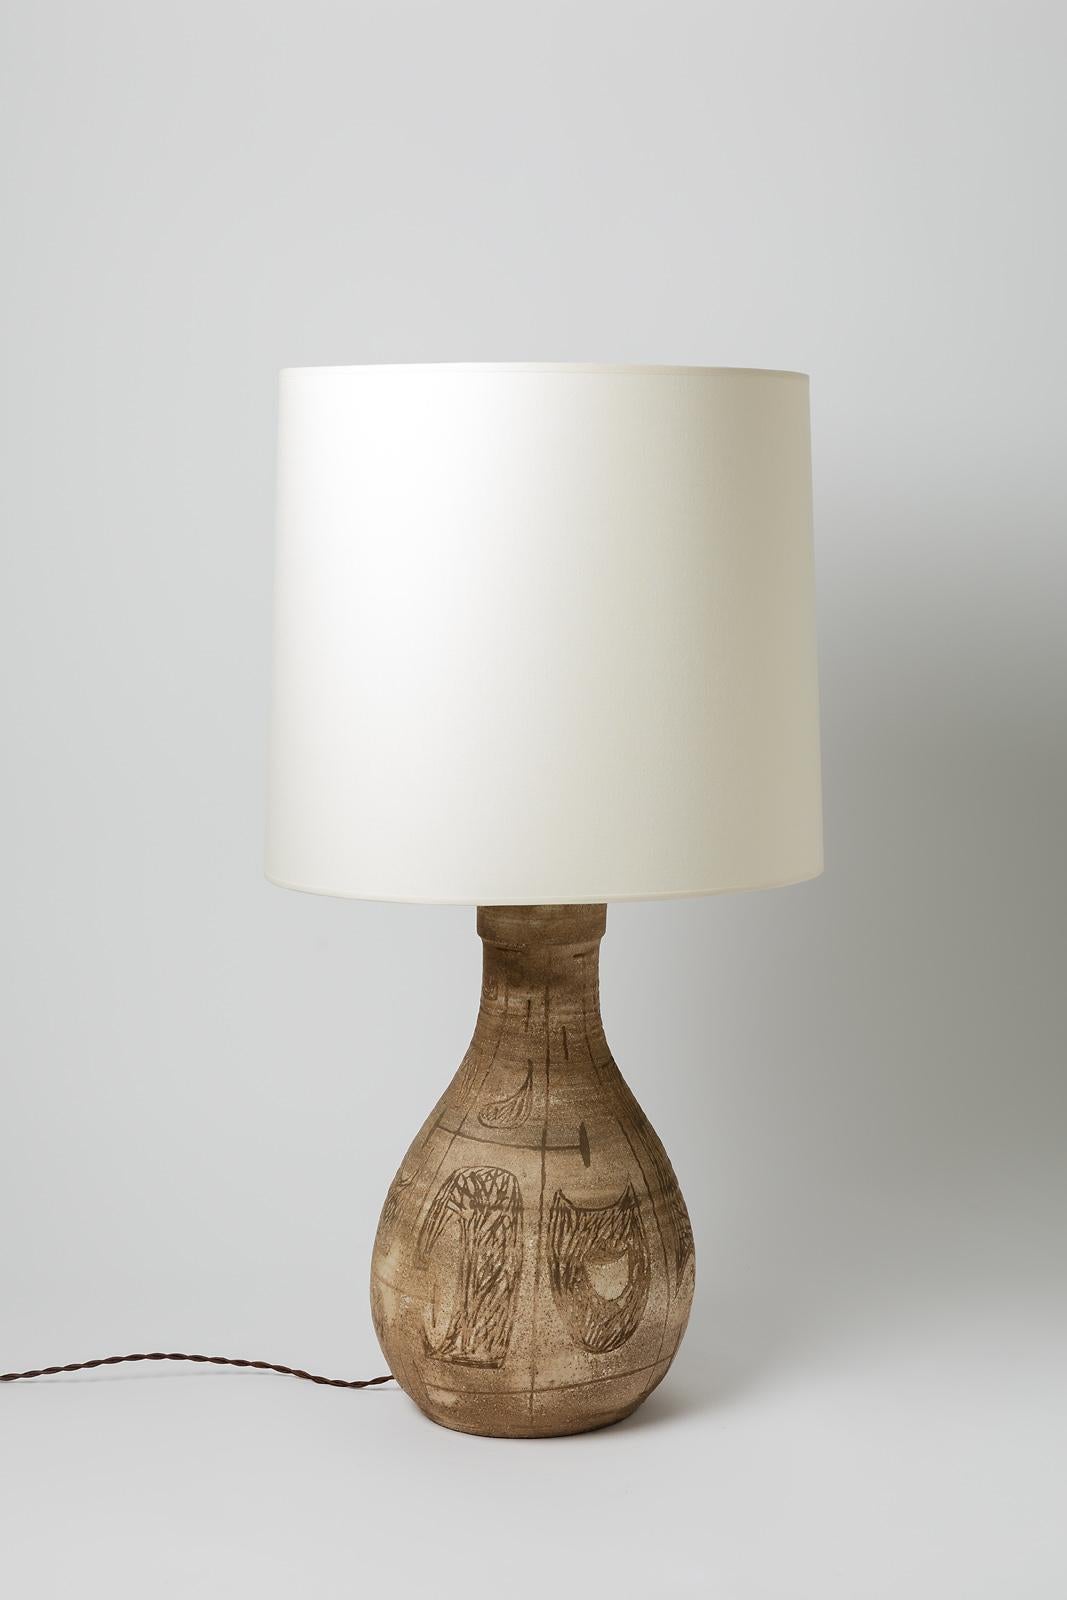 Ceramic Glazed ceramic table lamp by Les potiers d’Accolay, circa 1960-1970 For Sale